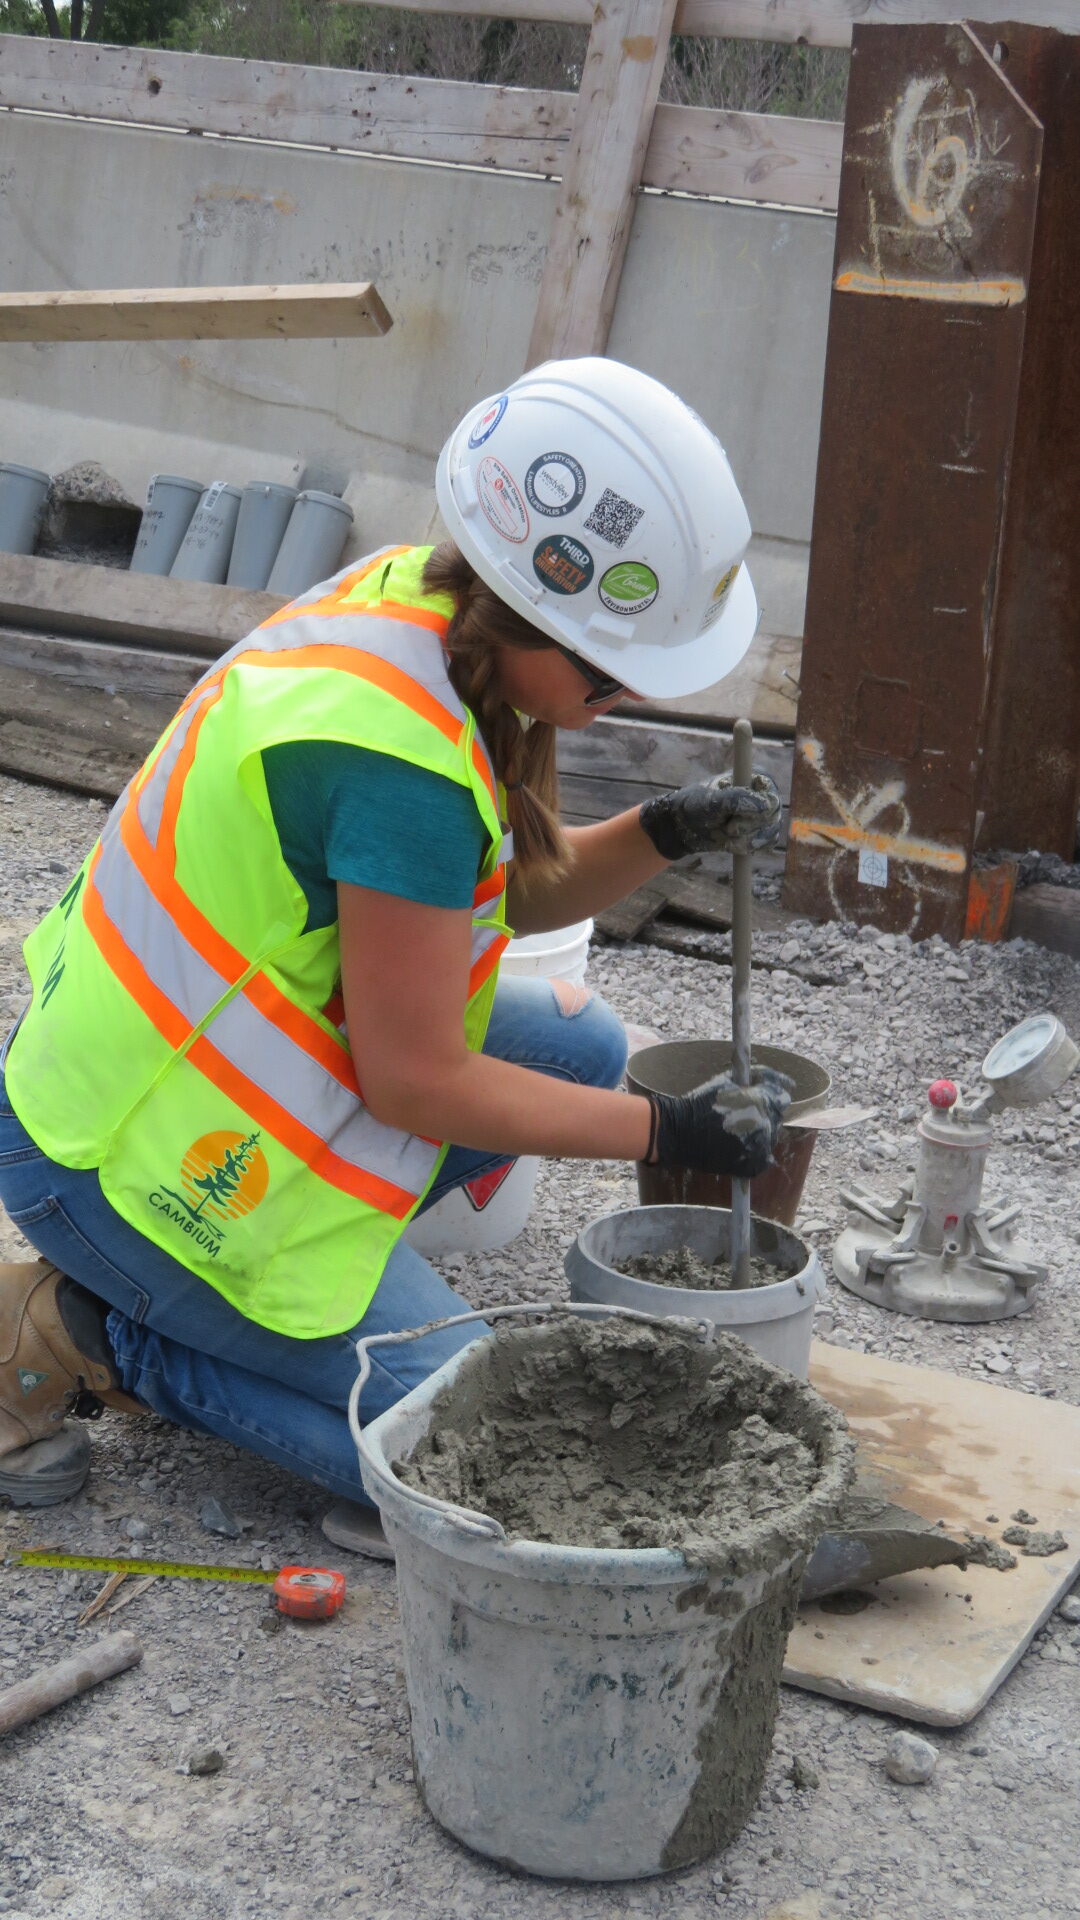 Concrete testing prior to placement